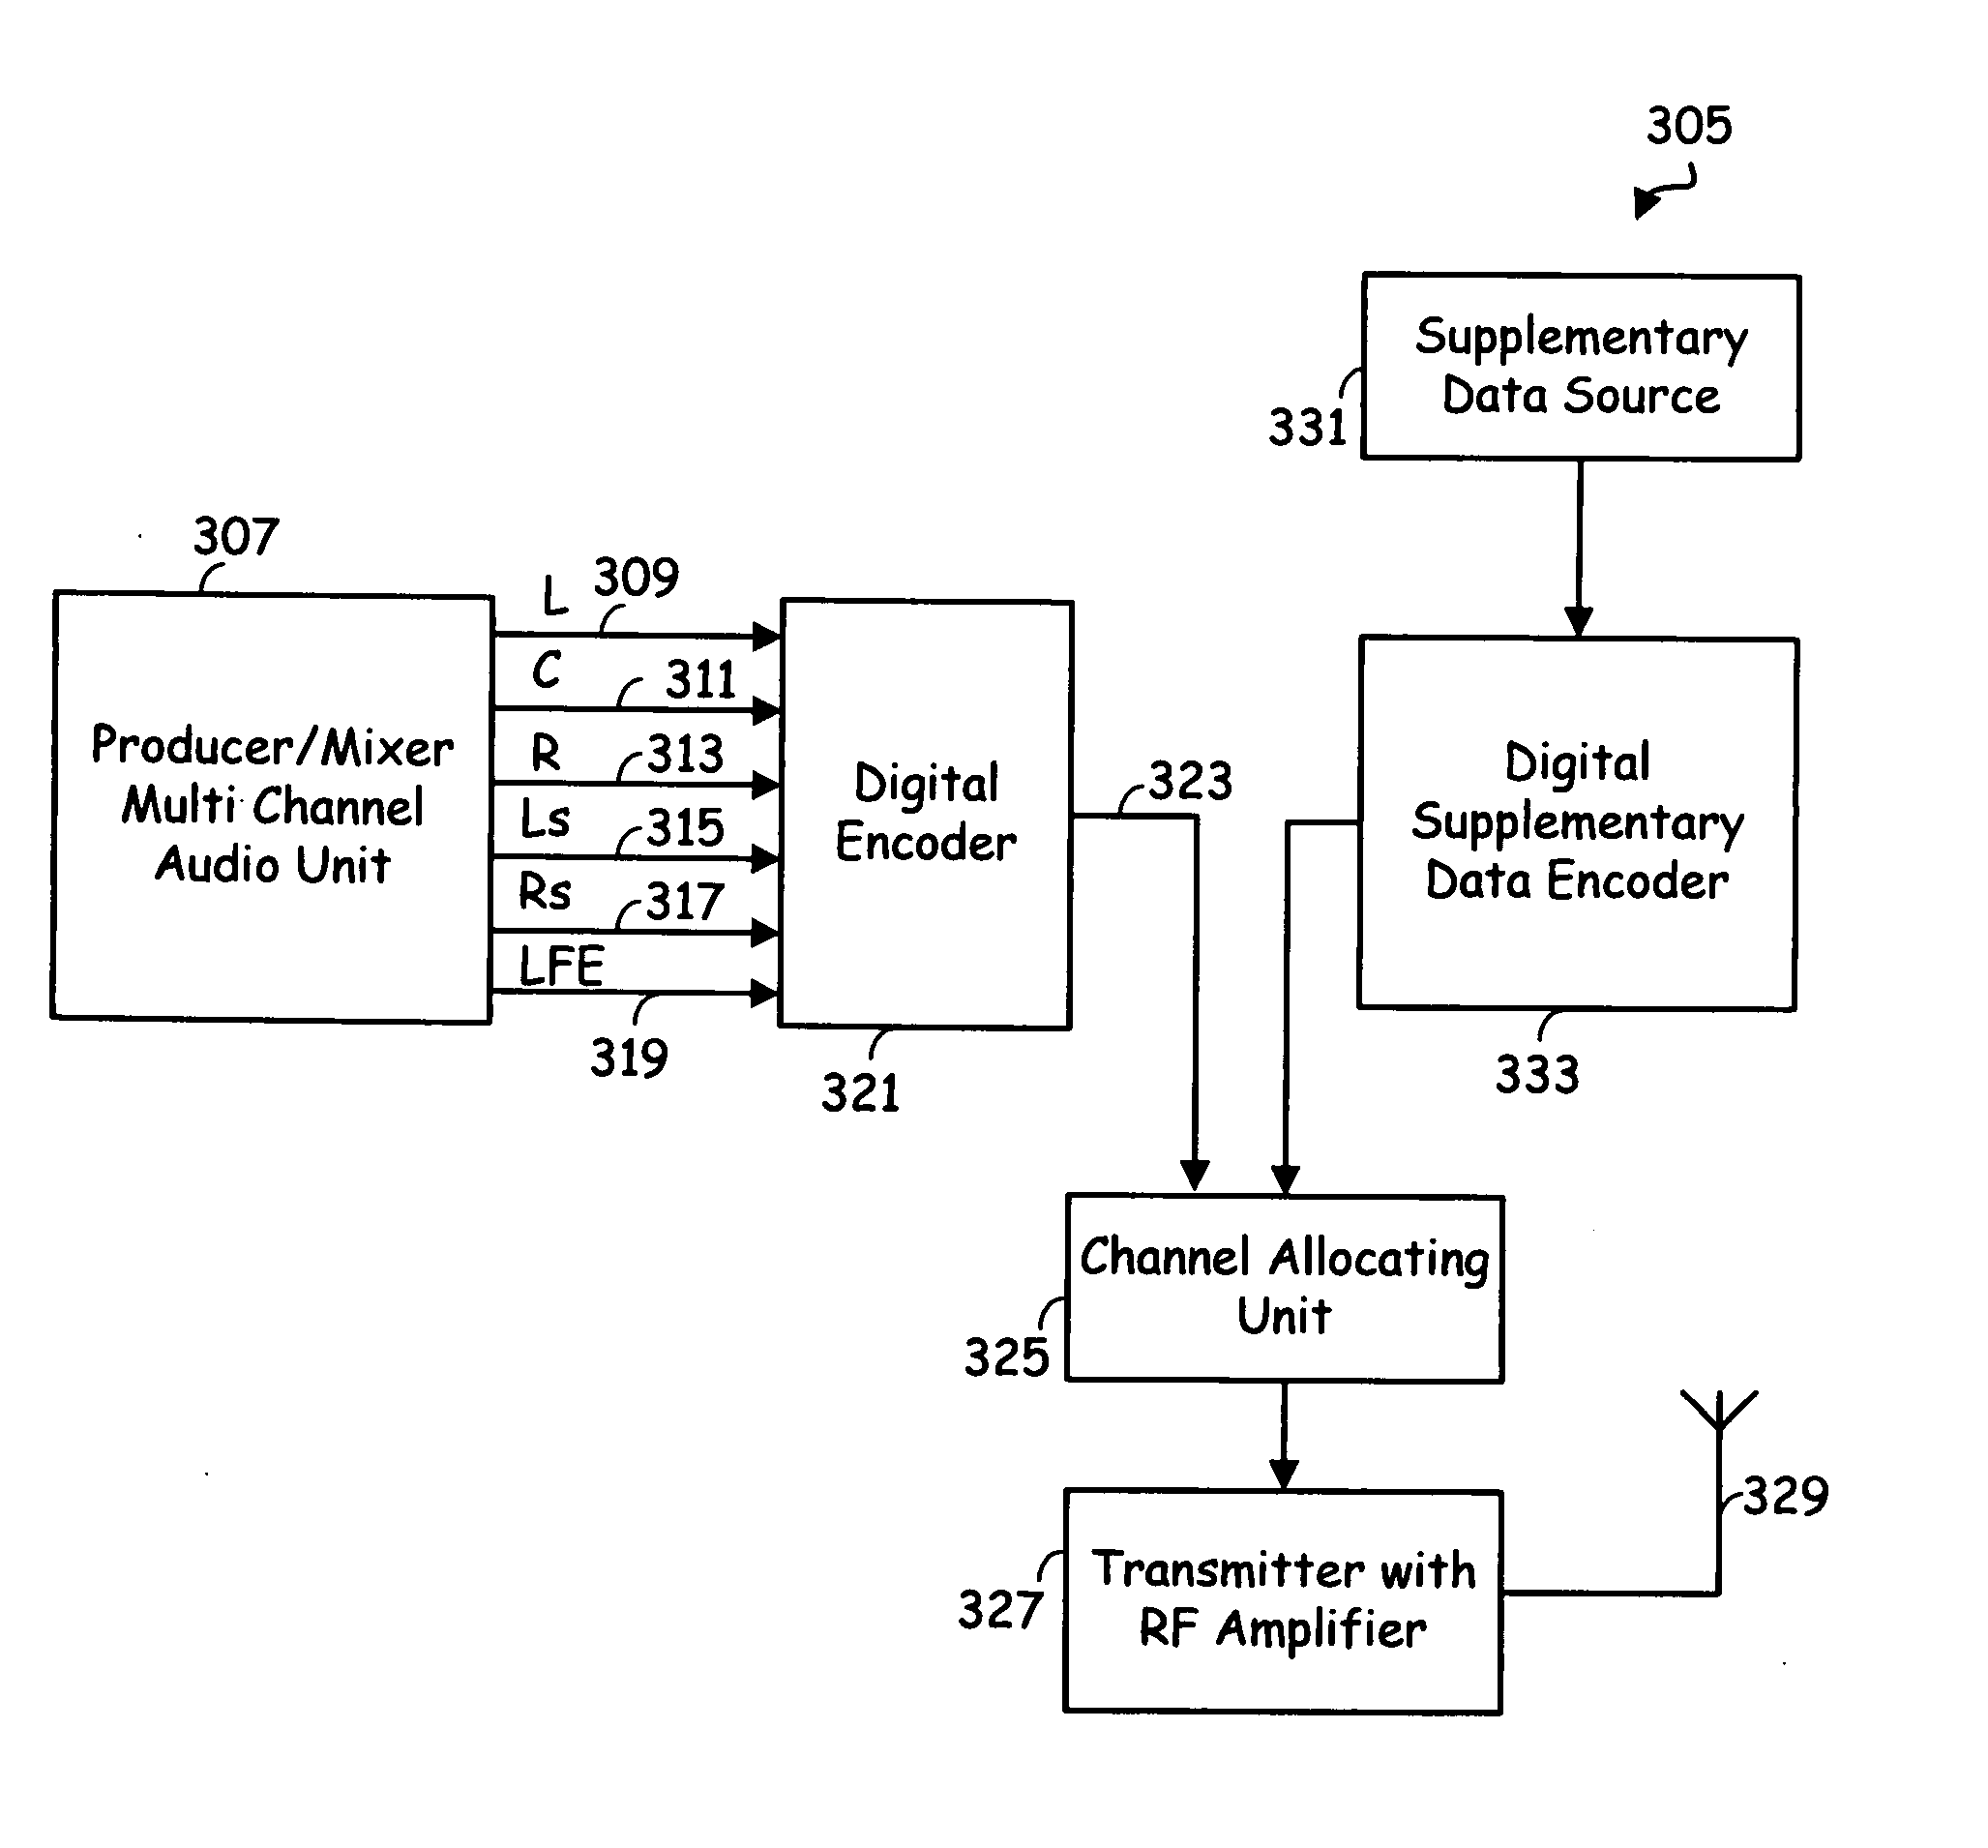 Multiple channel audio system supporting data channel replacement